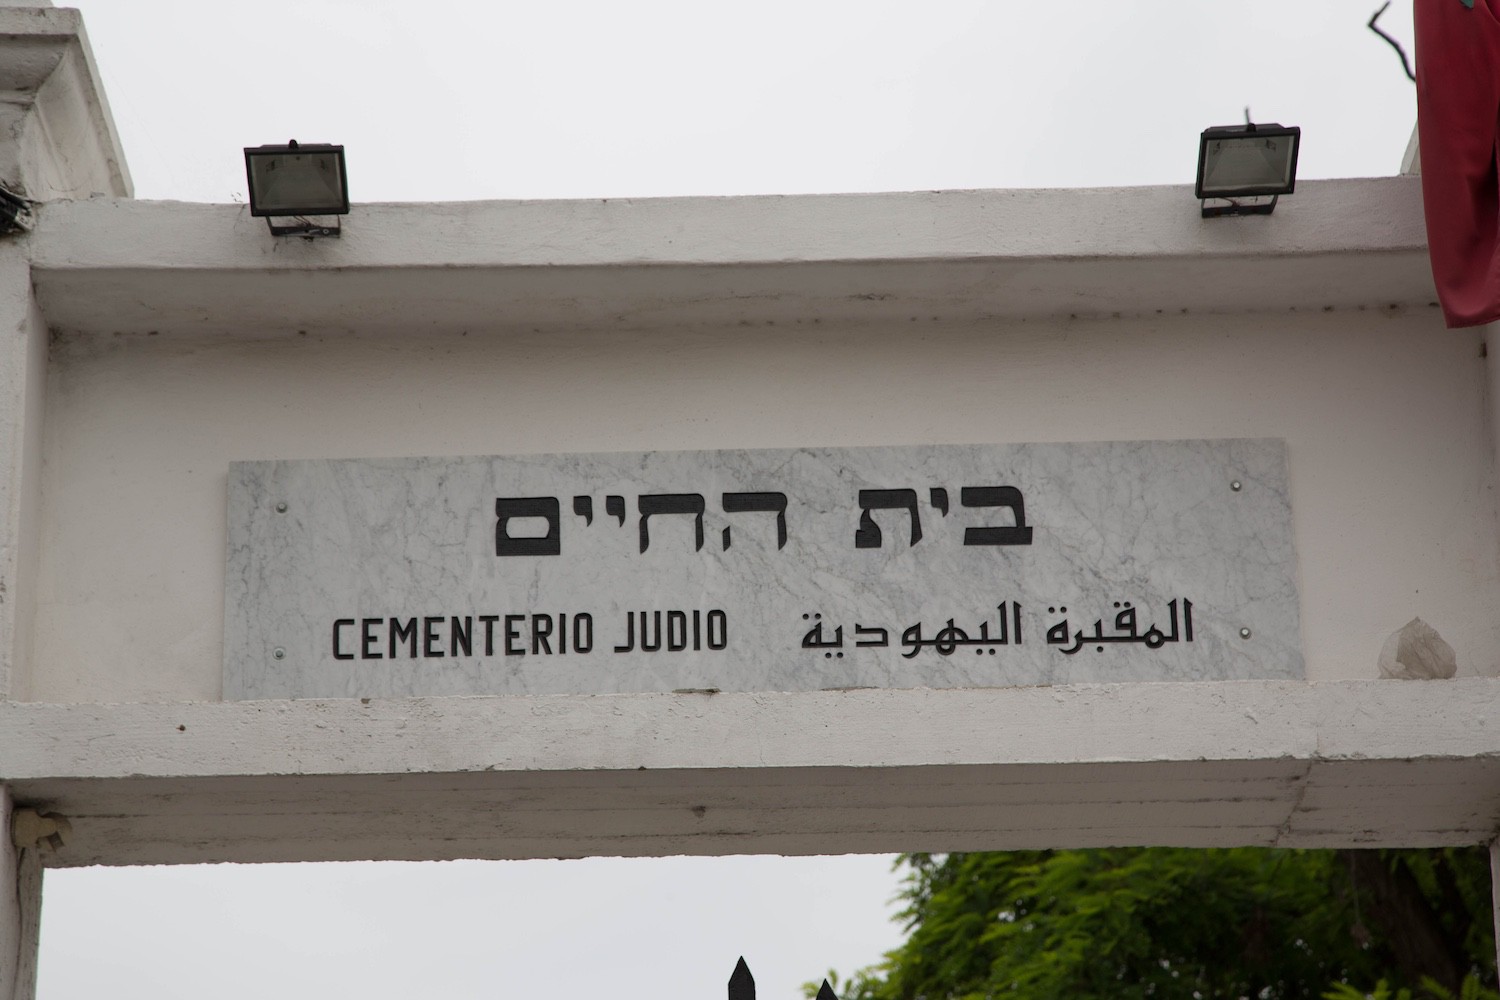 Jewish Cemetery of Tangier - Detail view of inscription above the cemetery entrance in Hebrew, Arabic, and Spanish